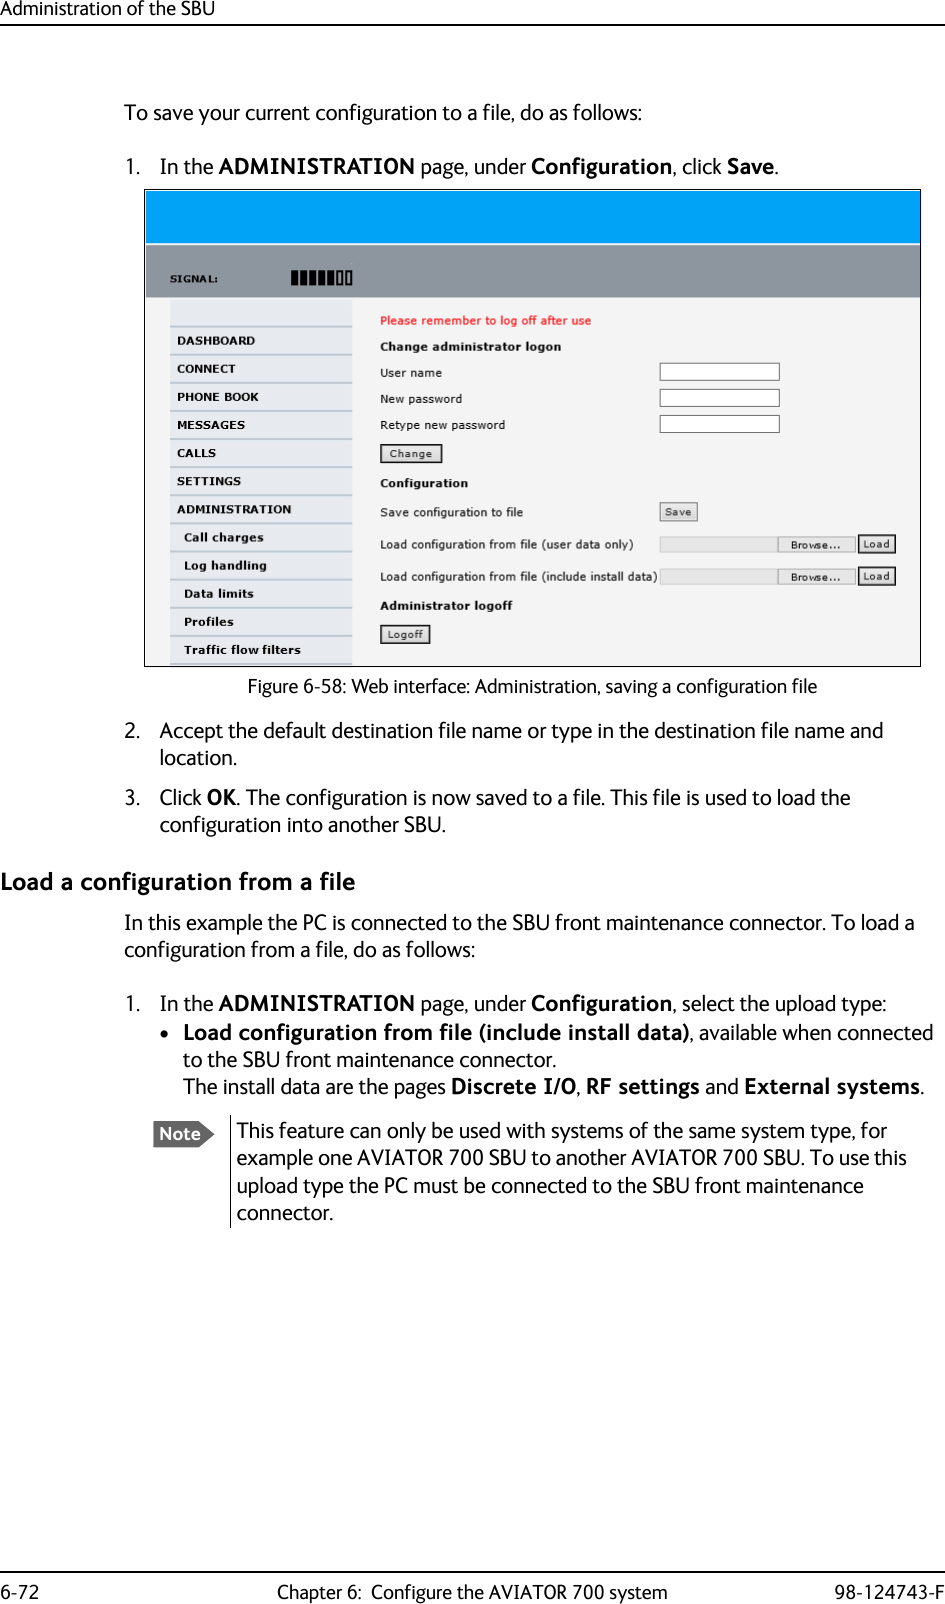 Administration of the SBU6-72 Chapter 6:  Configure the AVIATOR 700 system 98-124743-FTo save your current configuration to a file, do as follows:1. In the ADMINISTRATION page, under Configuration, click Save.Figure 6-58: Web interface: Administration, saving a configuration file2. Accept the default destination file name or type in the destination file name and location.3. Click OK. The configuration is now saved to a file. This file is used to load the configuration into another SBU.Load a configuration from a fileIn this example the PC is connected to the SBU front maintenance connector. To load a configuration from a file, do as follows:1. In the ADMINISTRATION page, under Configuration, select the upload type:•Load configuration from file (include install data), available when connected to the SBU front maintenance connector.The install data are the pages Discrete I/O, RF settings and External systems.NoteThis feature can only be used with systems of the same system type, for example one AVIATOR 700 SBU to another AVIATOR 700 SBU. To use this upload type the PC must be connected to the SBU front maintenance connector.